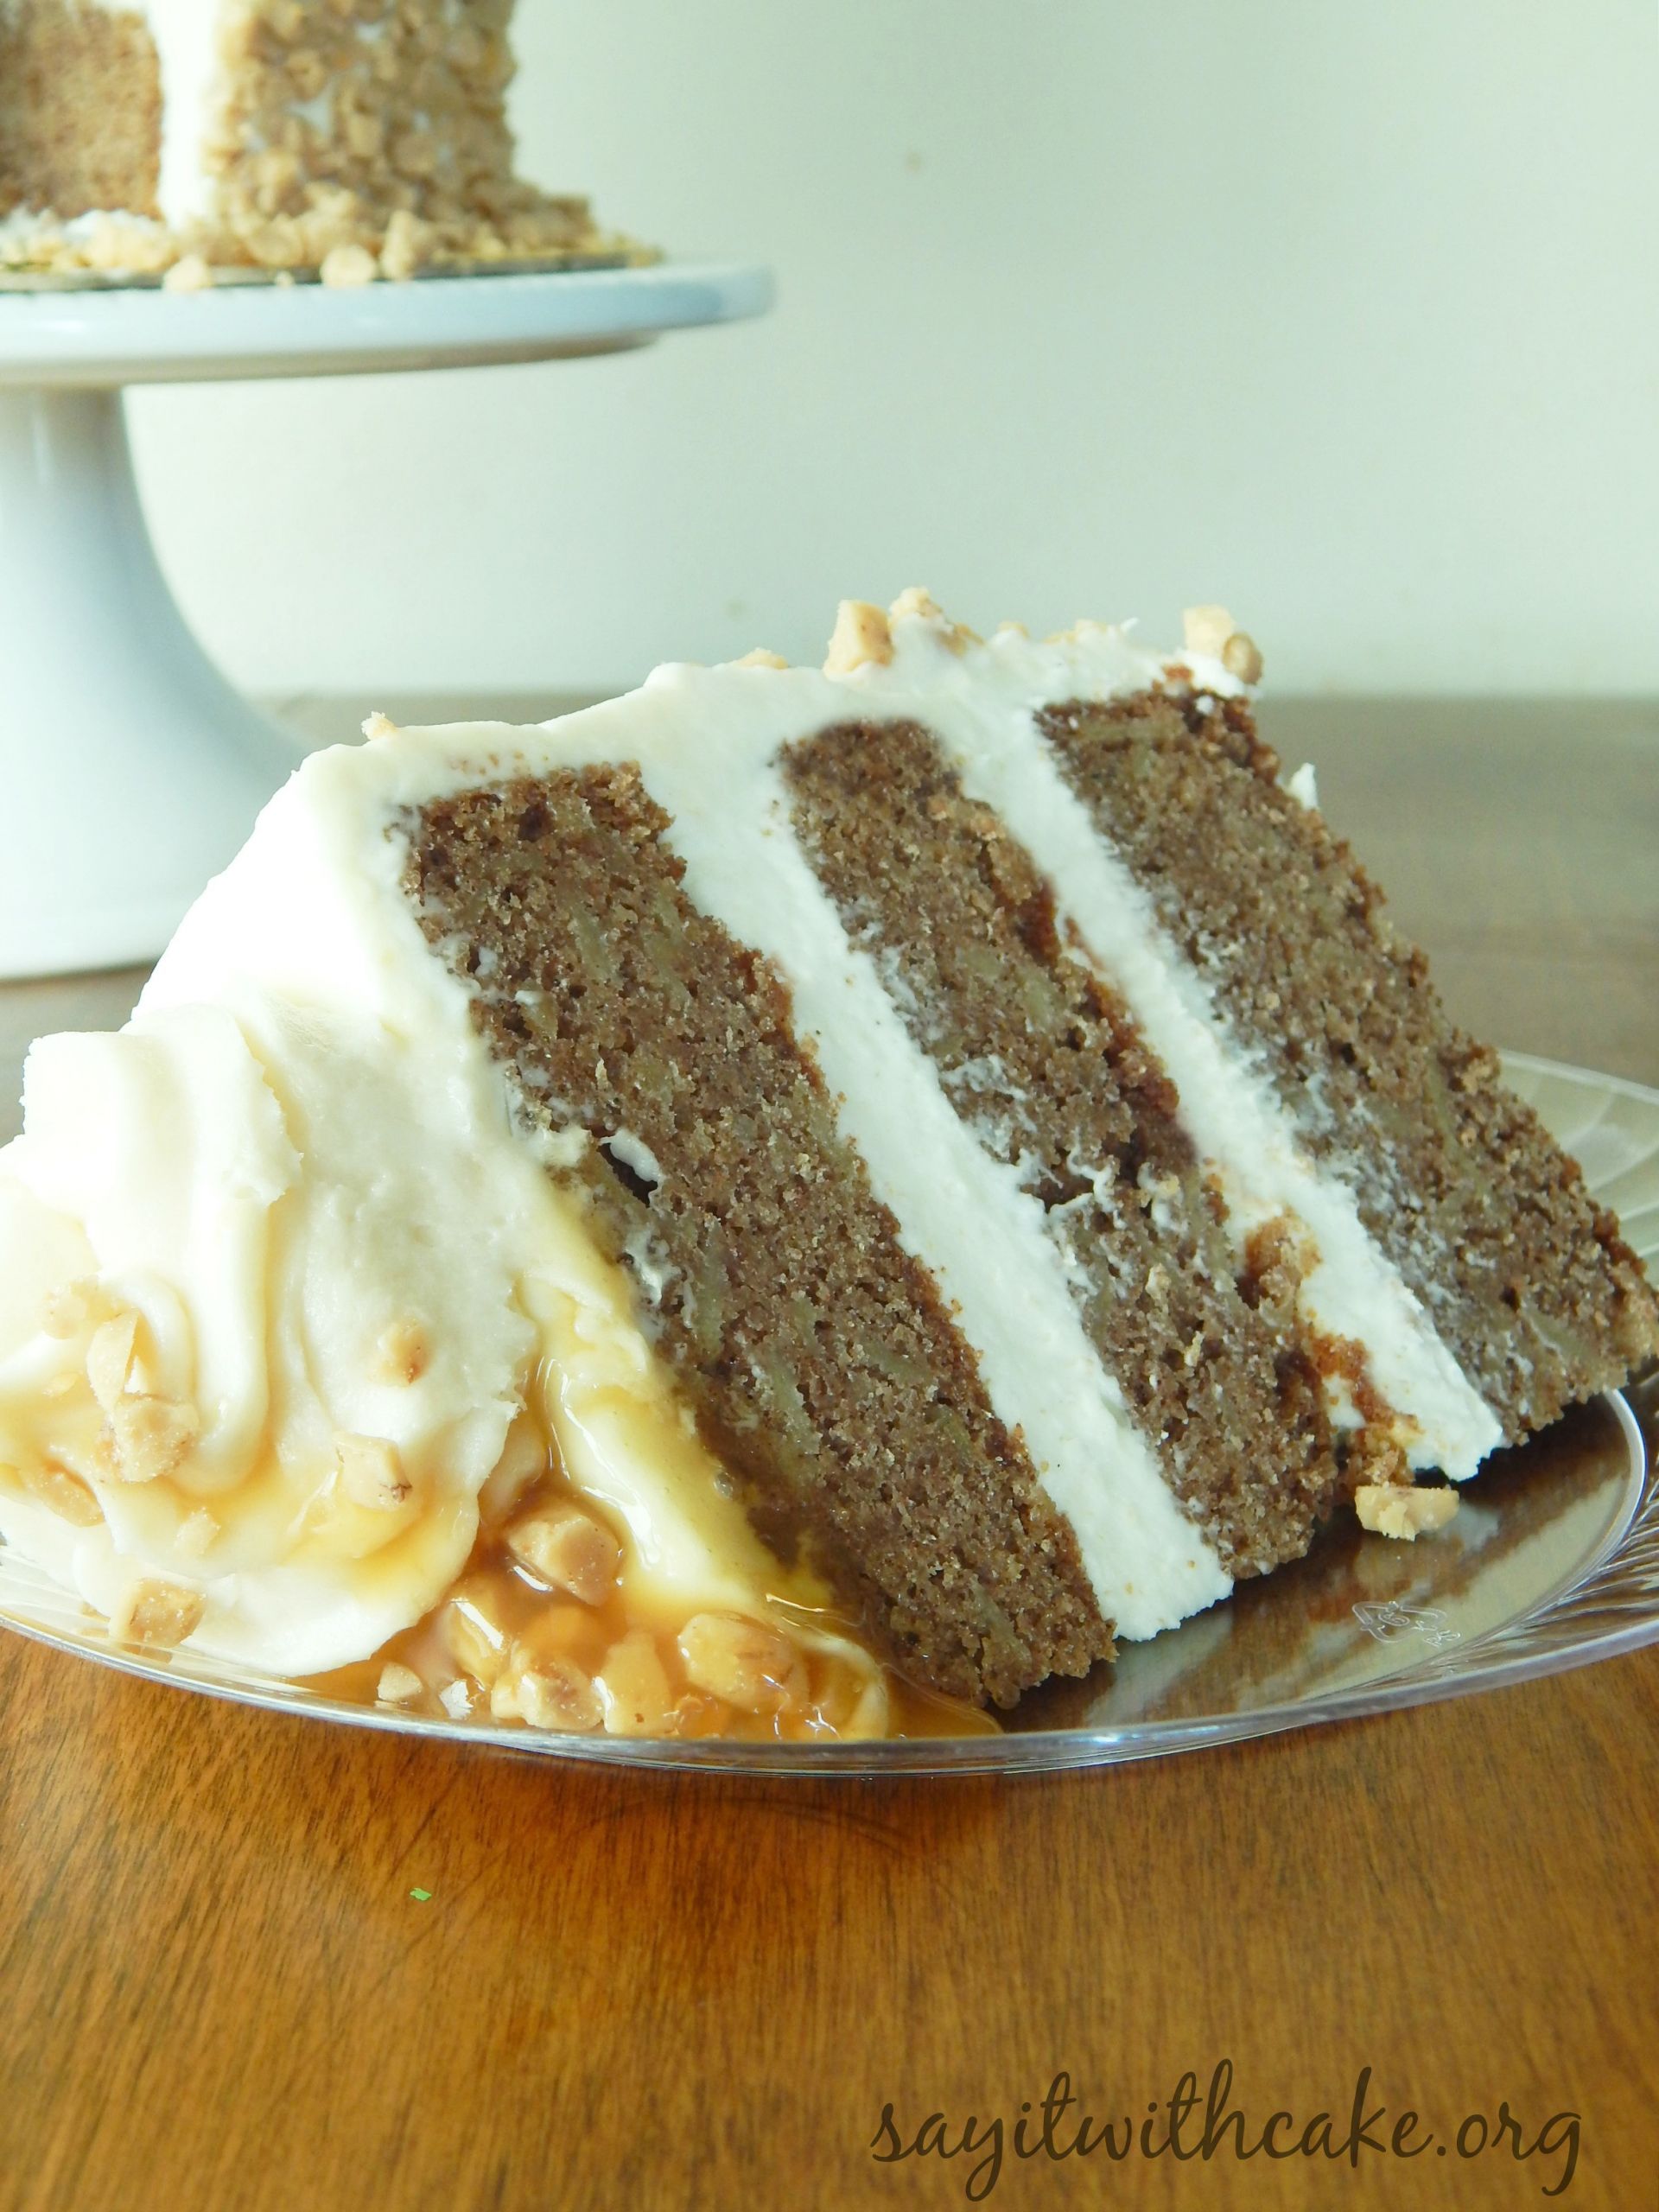 Spice Cake Recipe With Cream Cheese Frosting
 Apple Spice Toffee Cake with Cream Cheese Frosting – Say